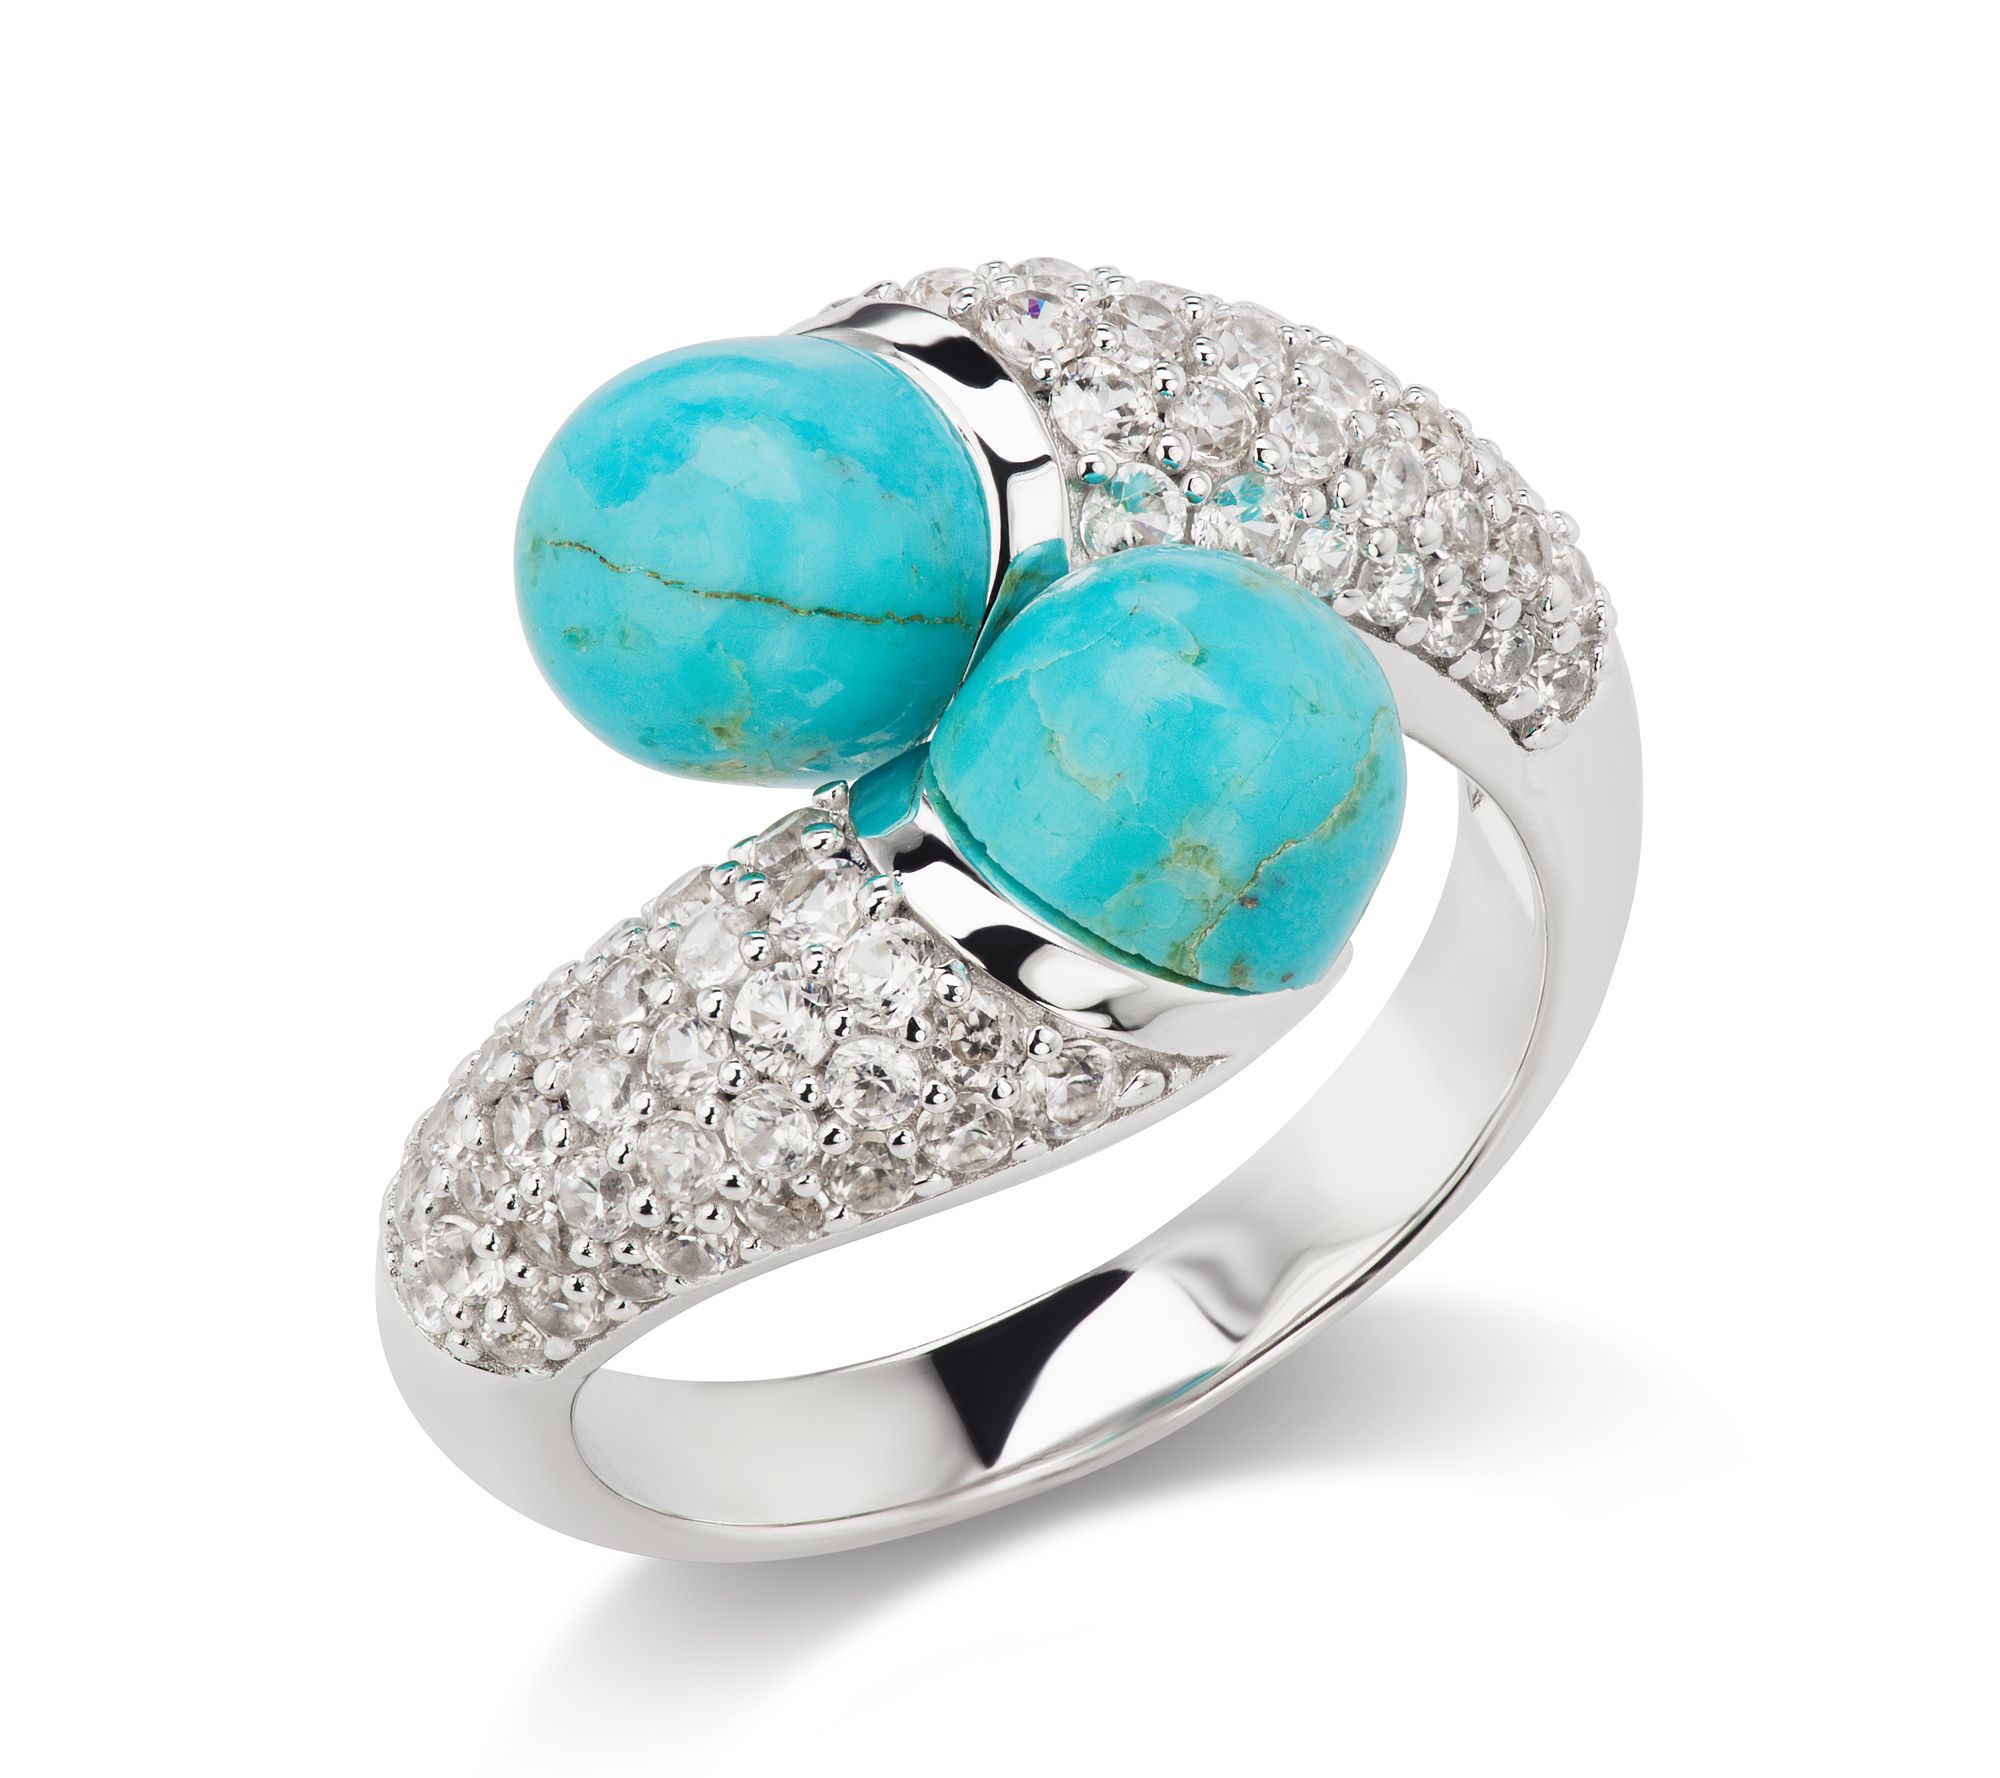 Generation Gems Sterling Silver Turquoise Bypass Ring - QVC.com